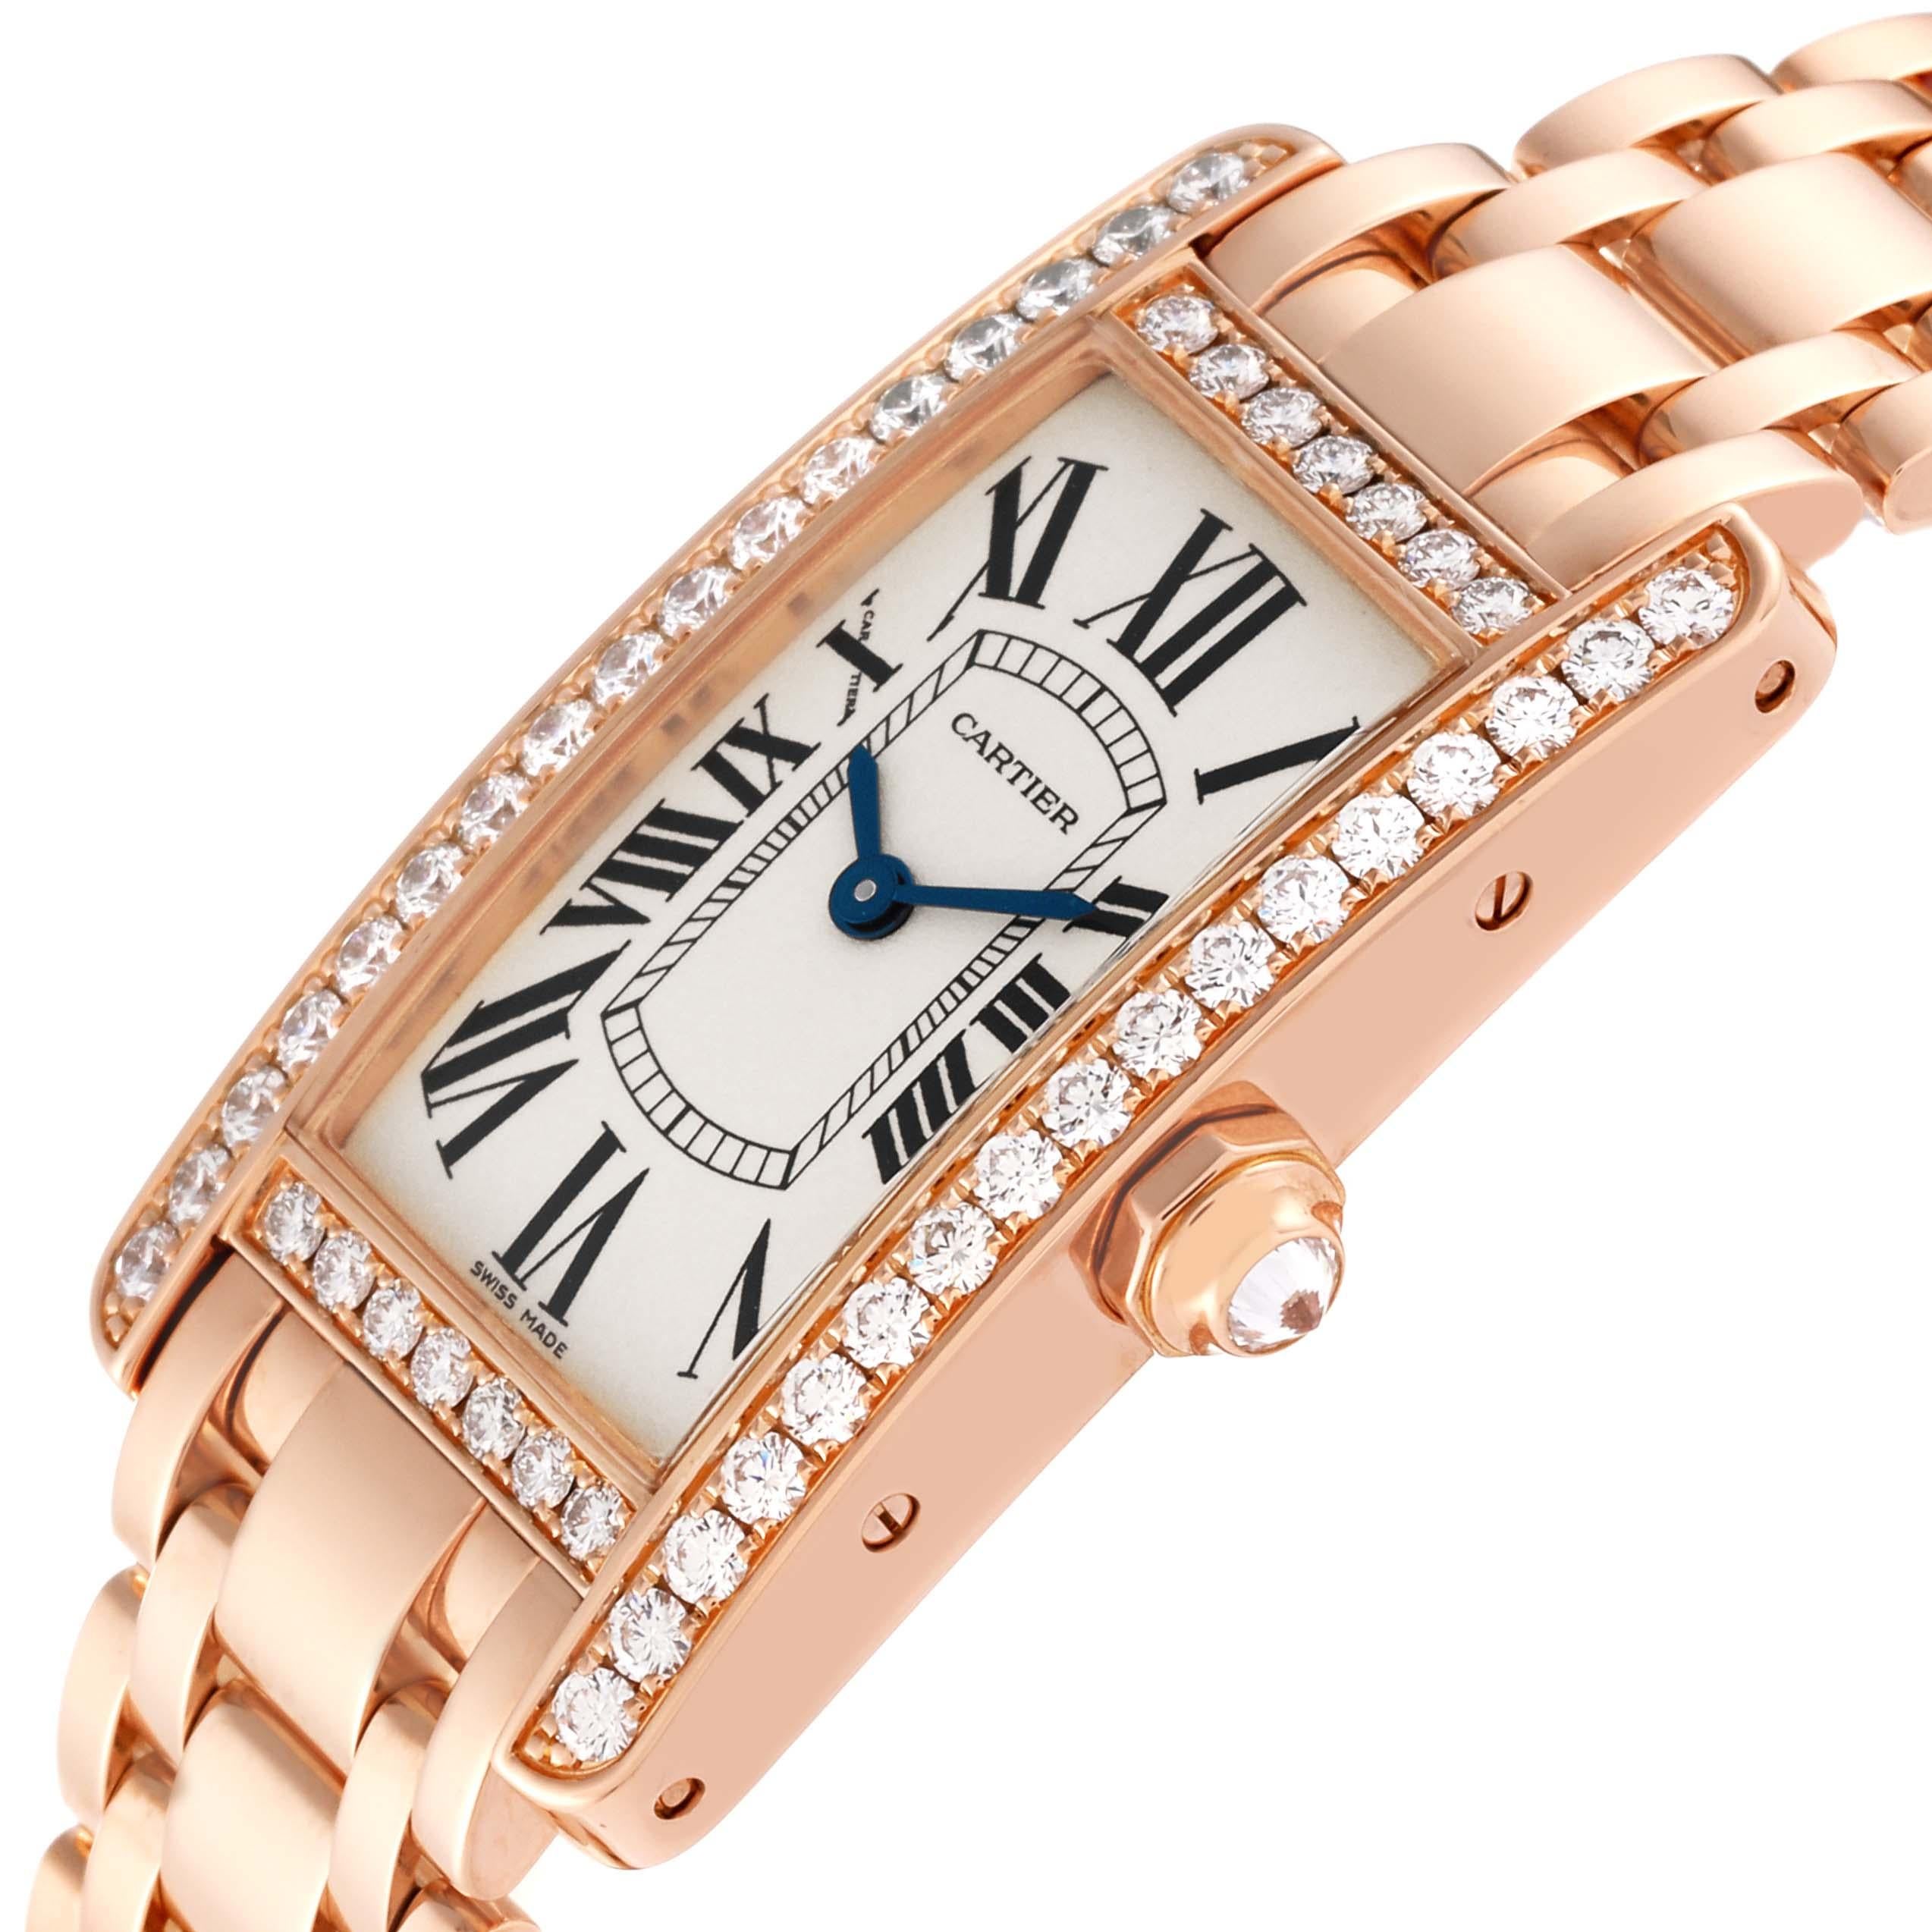 Cartier Tank Americaine Rose Gold Diamond Ladies Watch WB7079M5 Box Card For Sale 1